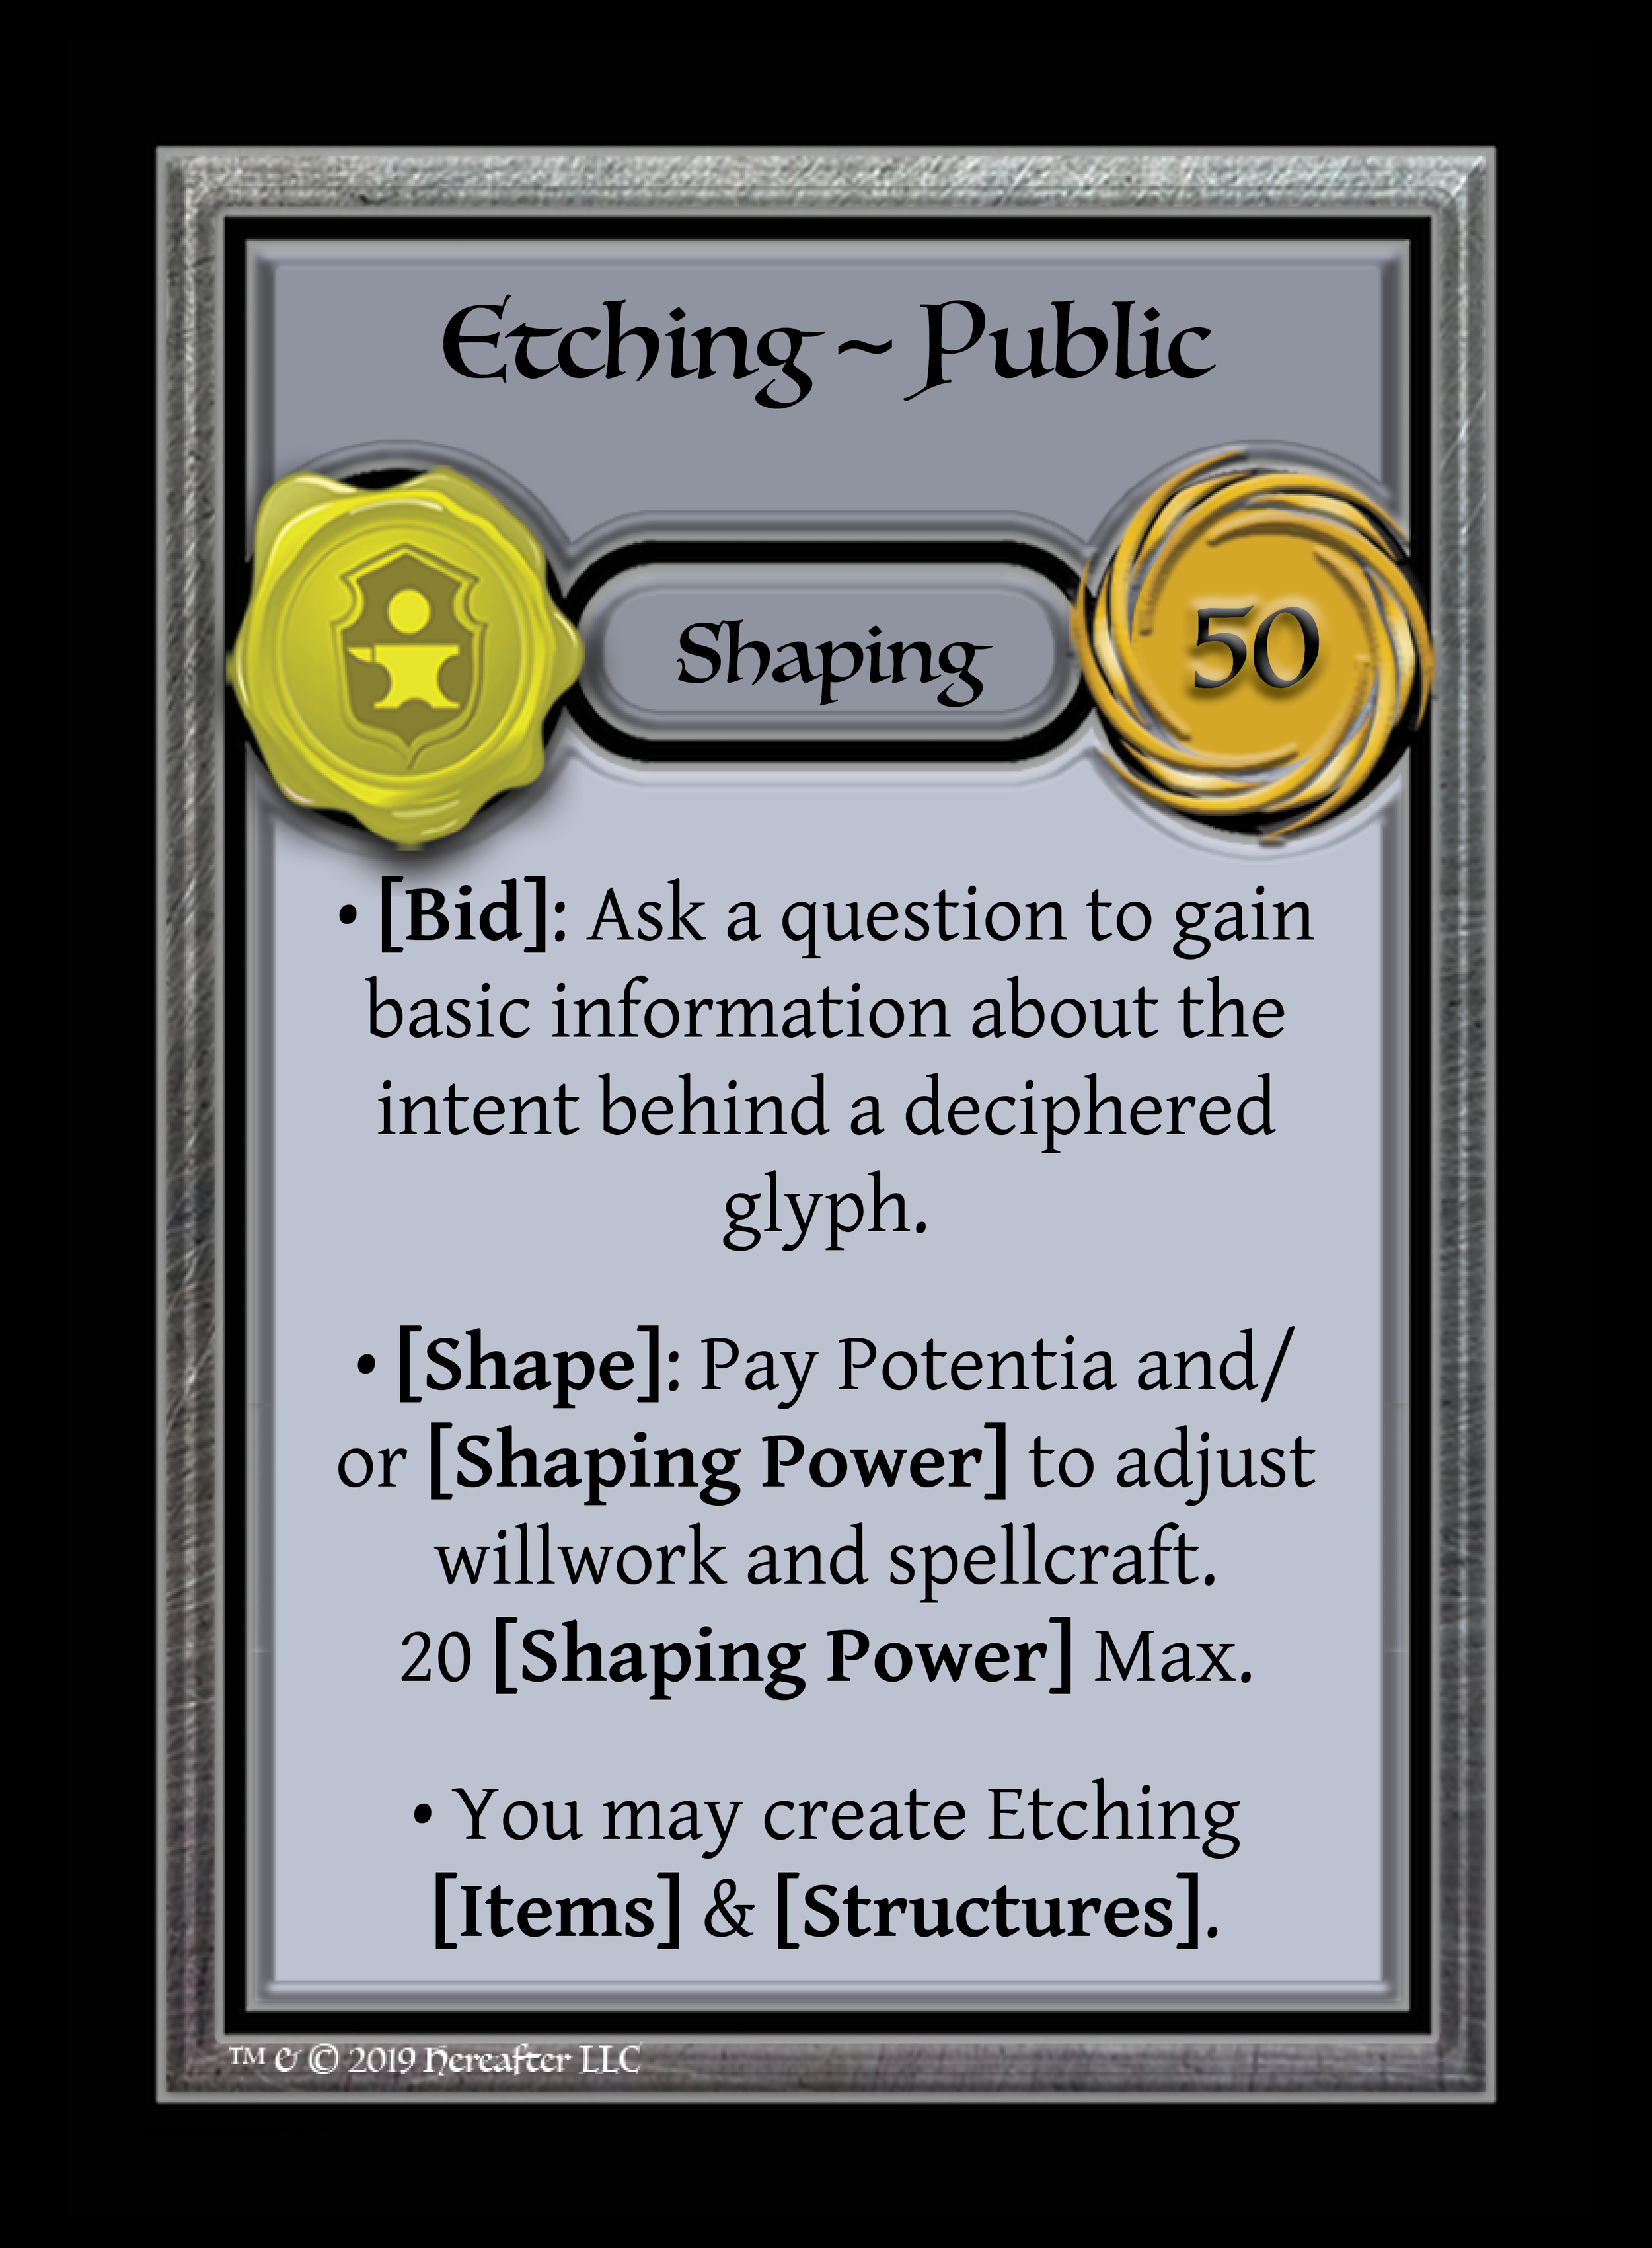 247_Shaping_Etching ~ Public_().png